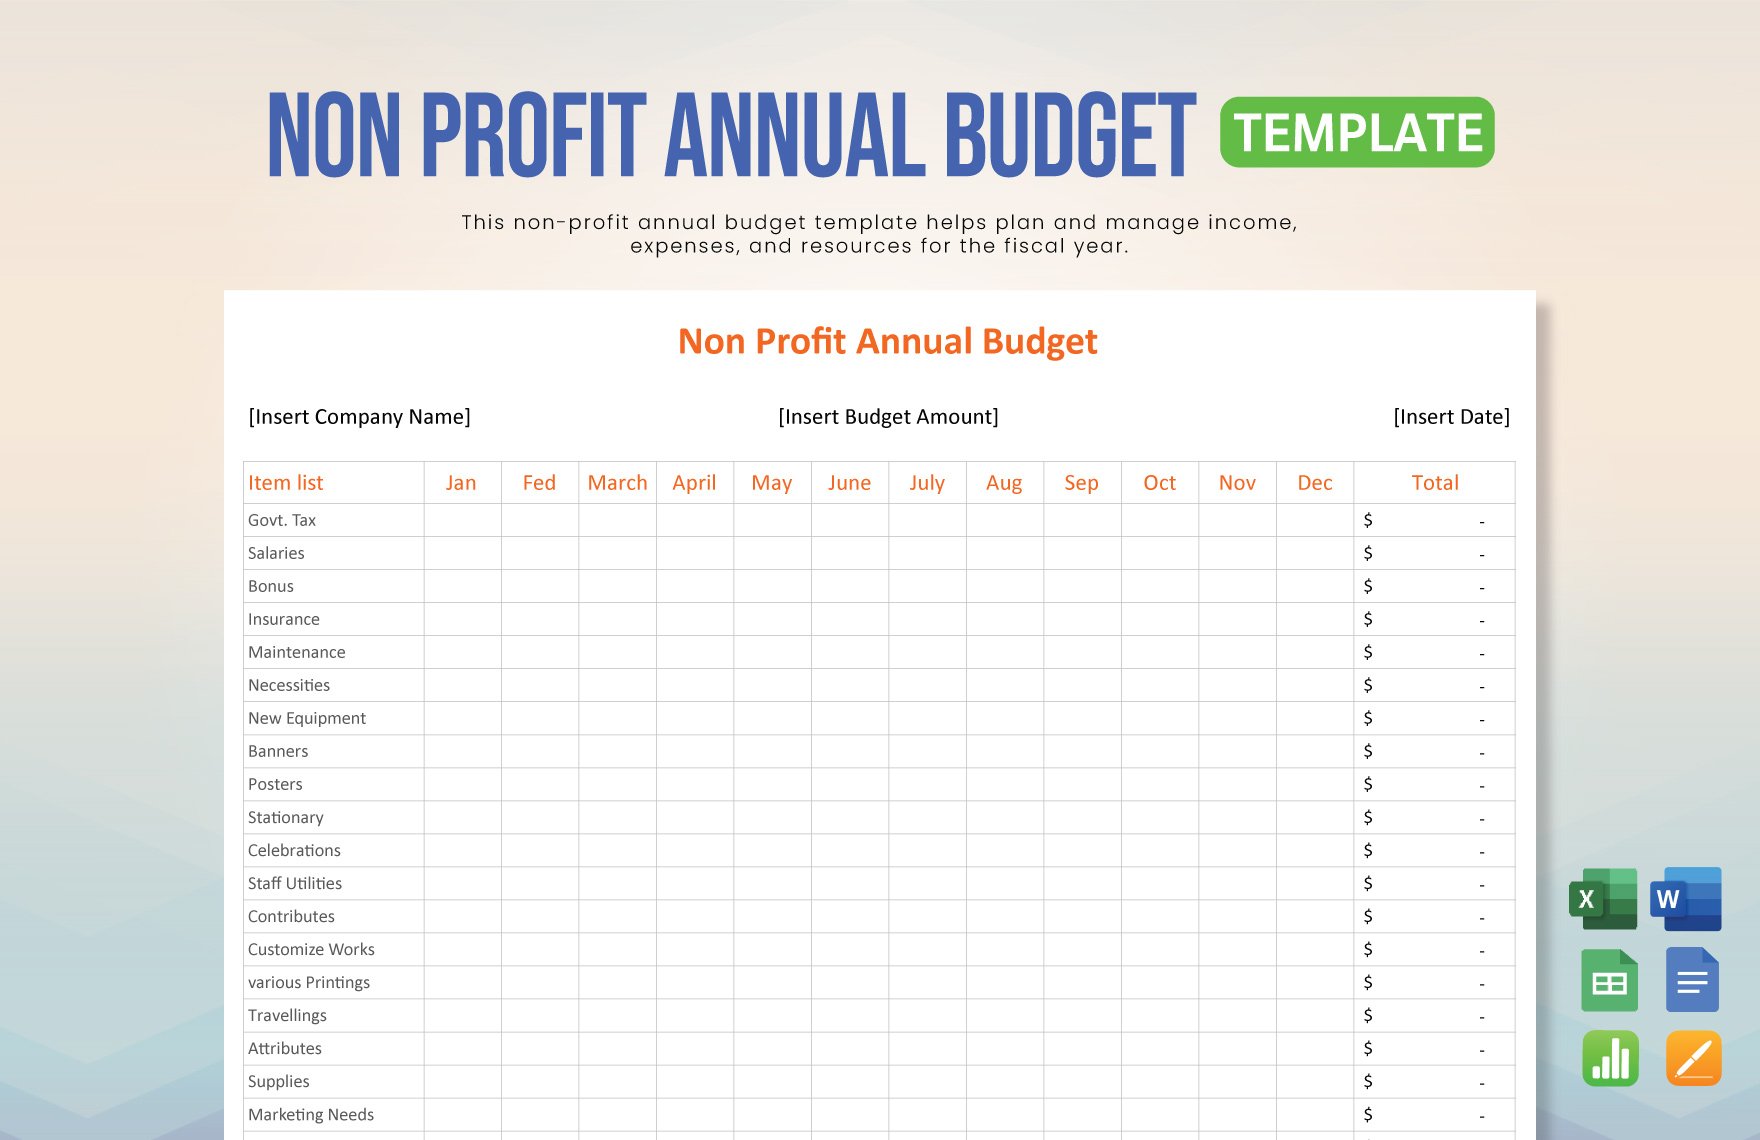 Non Profit Annual Budget Template in Word, Google Docs, Excel, PDF, Google Sheets, Apple Pages, Apple Numbers